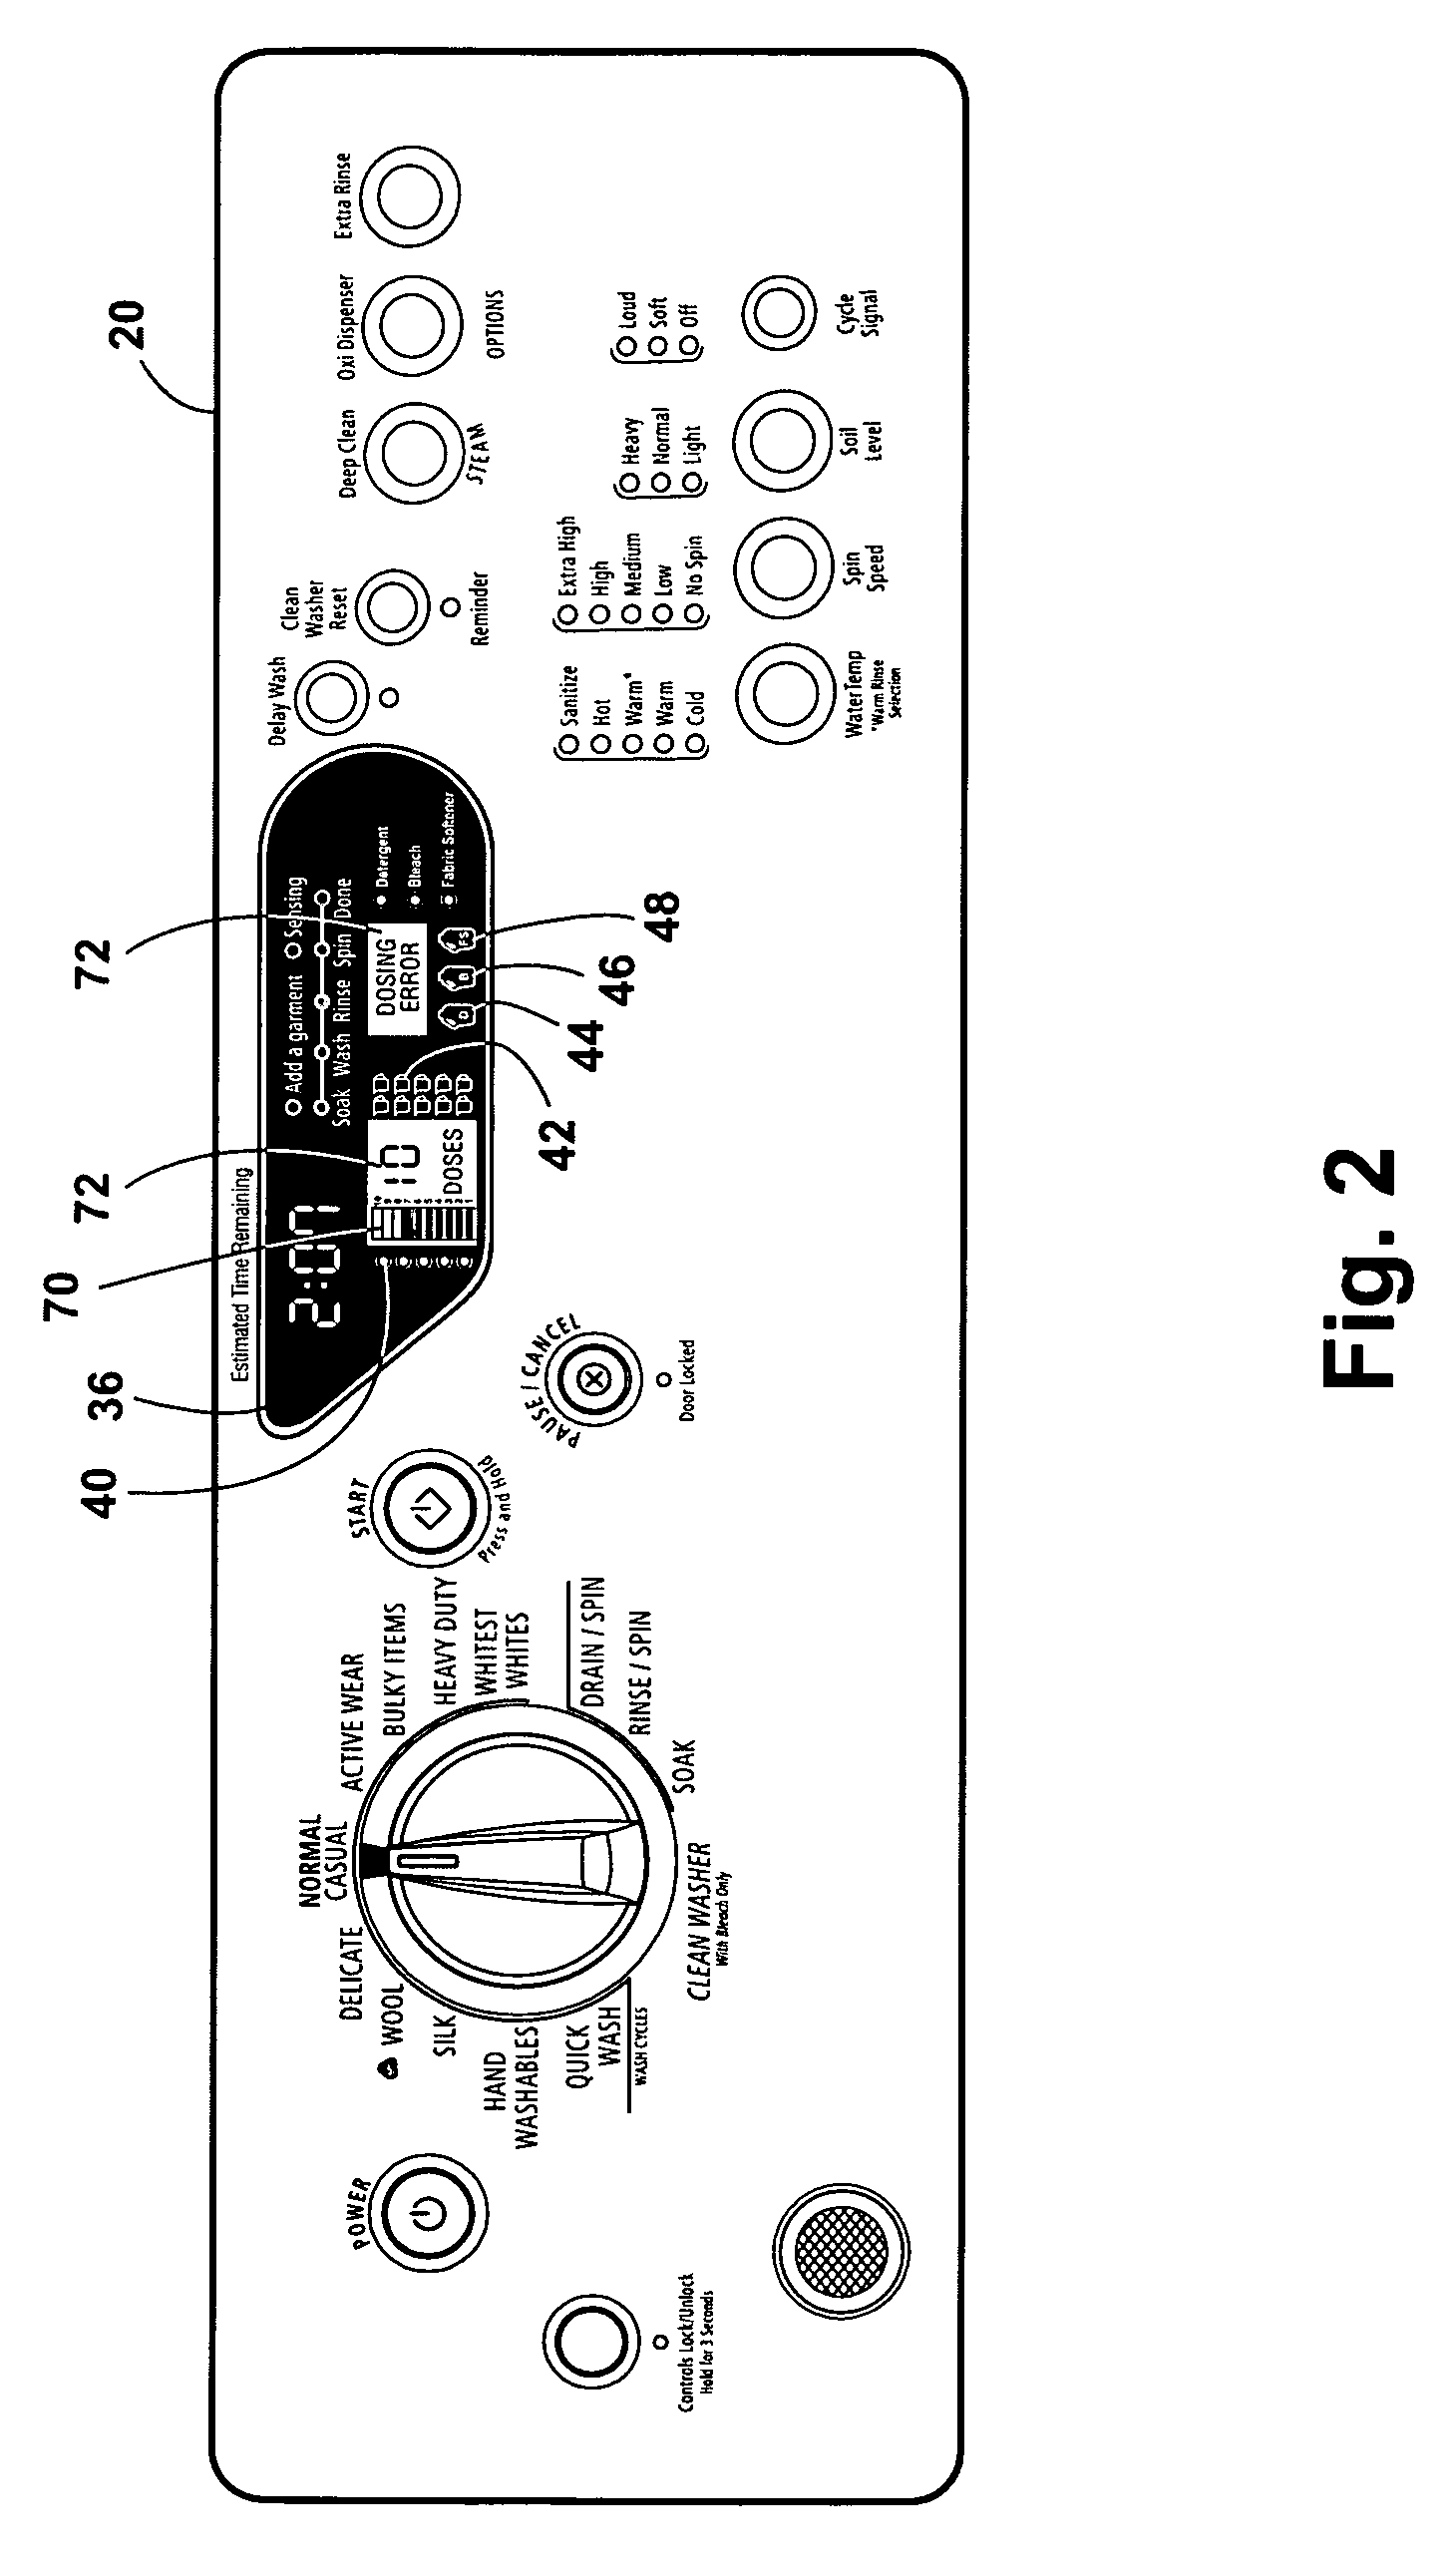 Method of indicating operational information for a bulk dispensing system